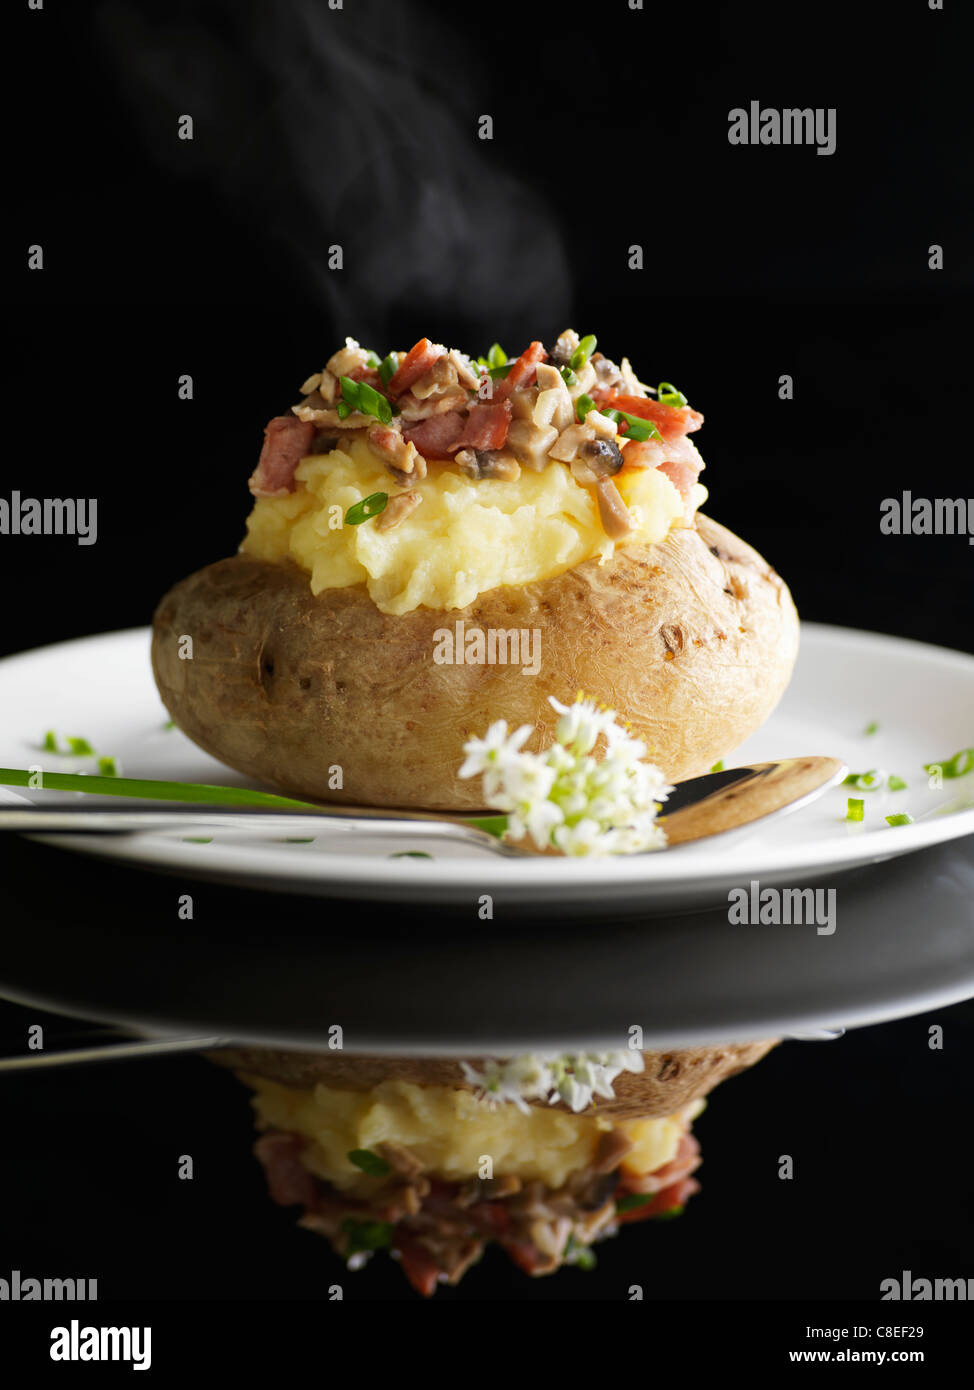 Baked potato with diced bacon and mushrooms Stock Photo